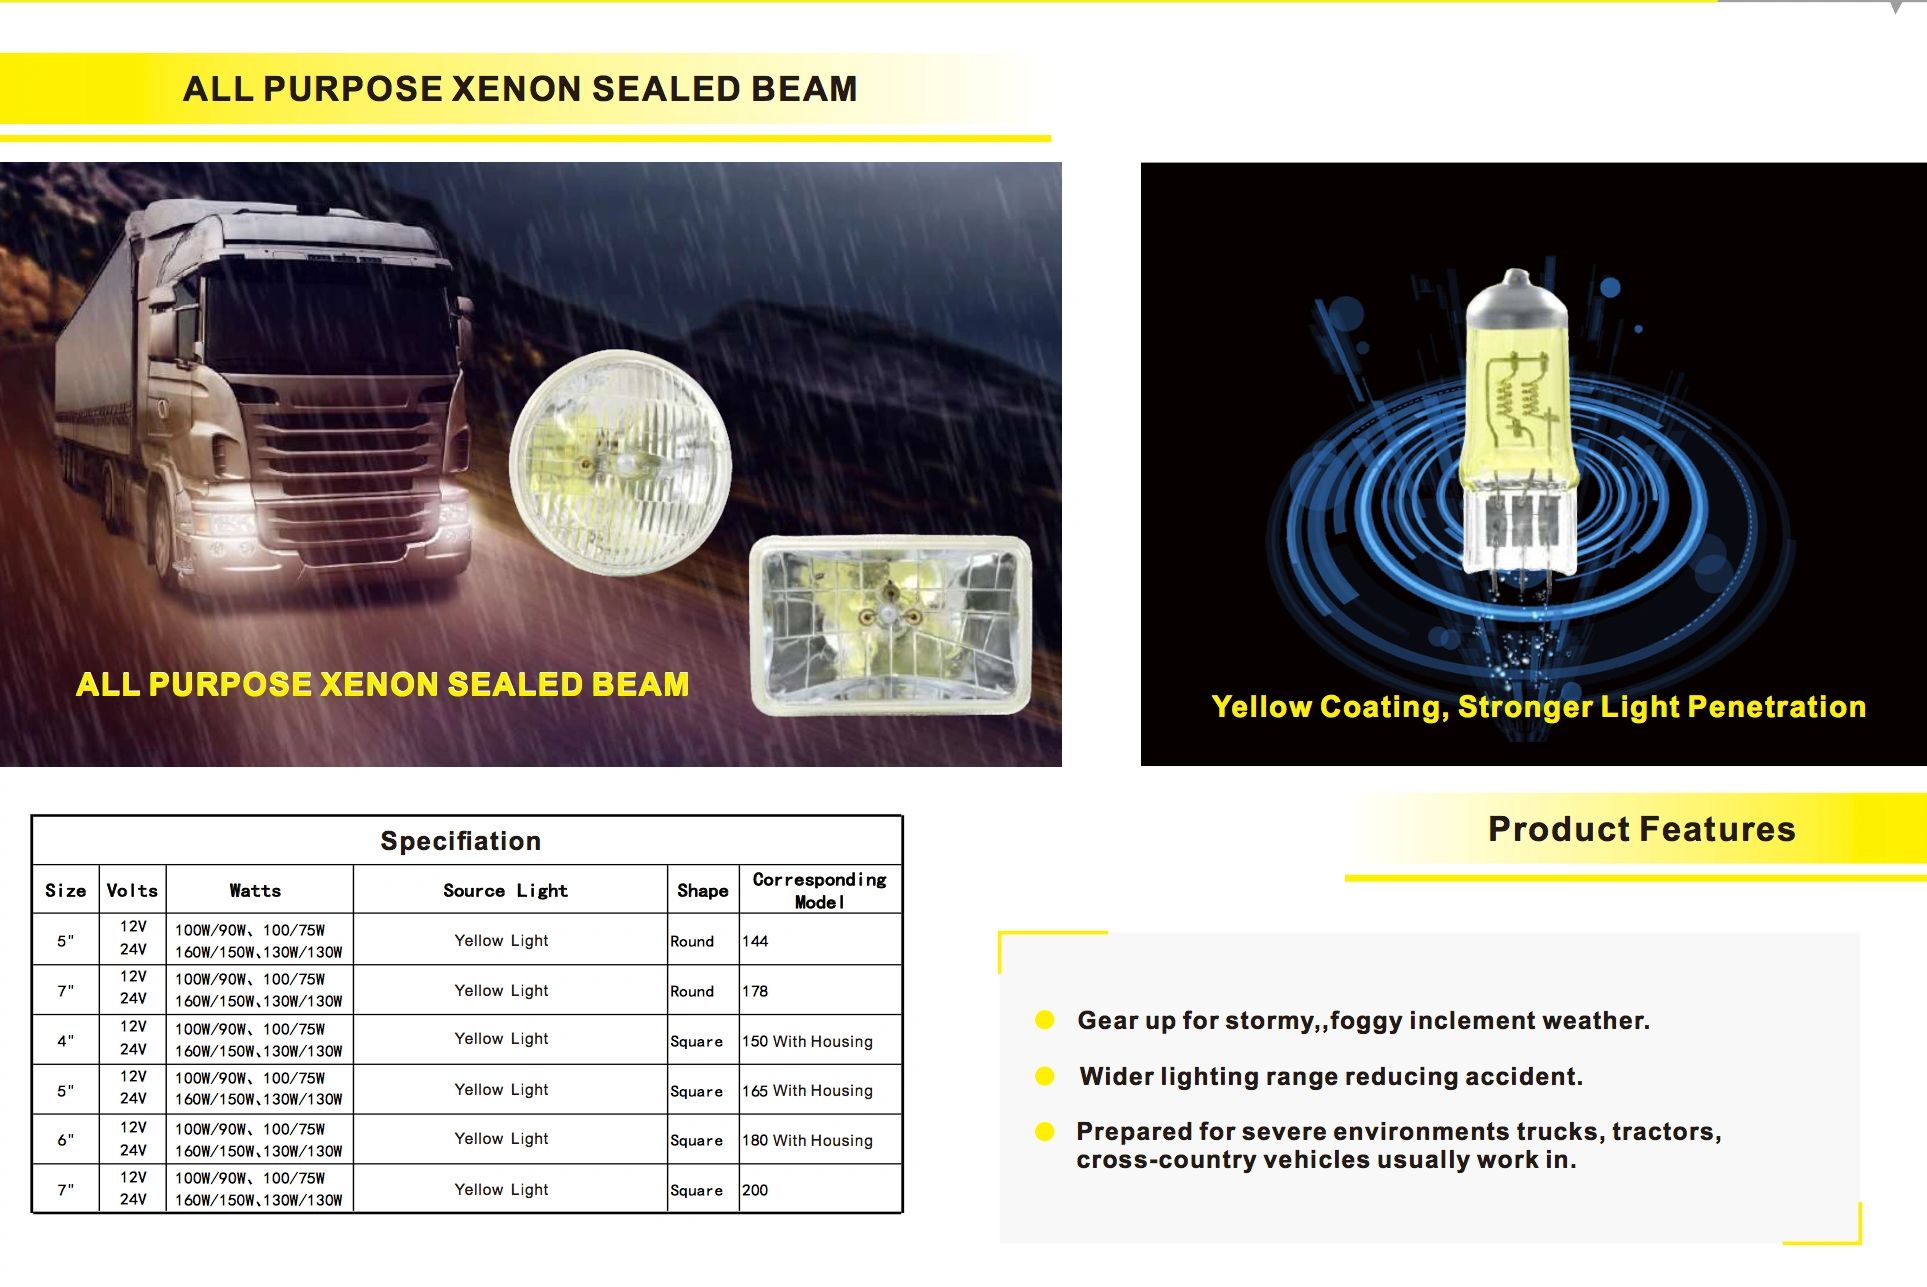 All Purpose Xenon Sealed Beam
Yellow Coating
Strong Light penetration